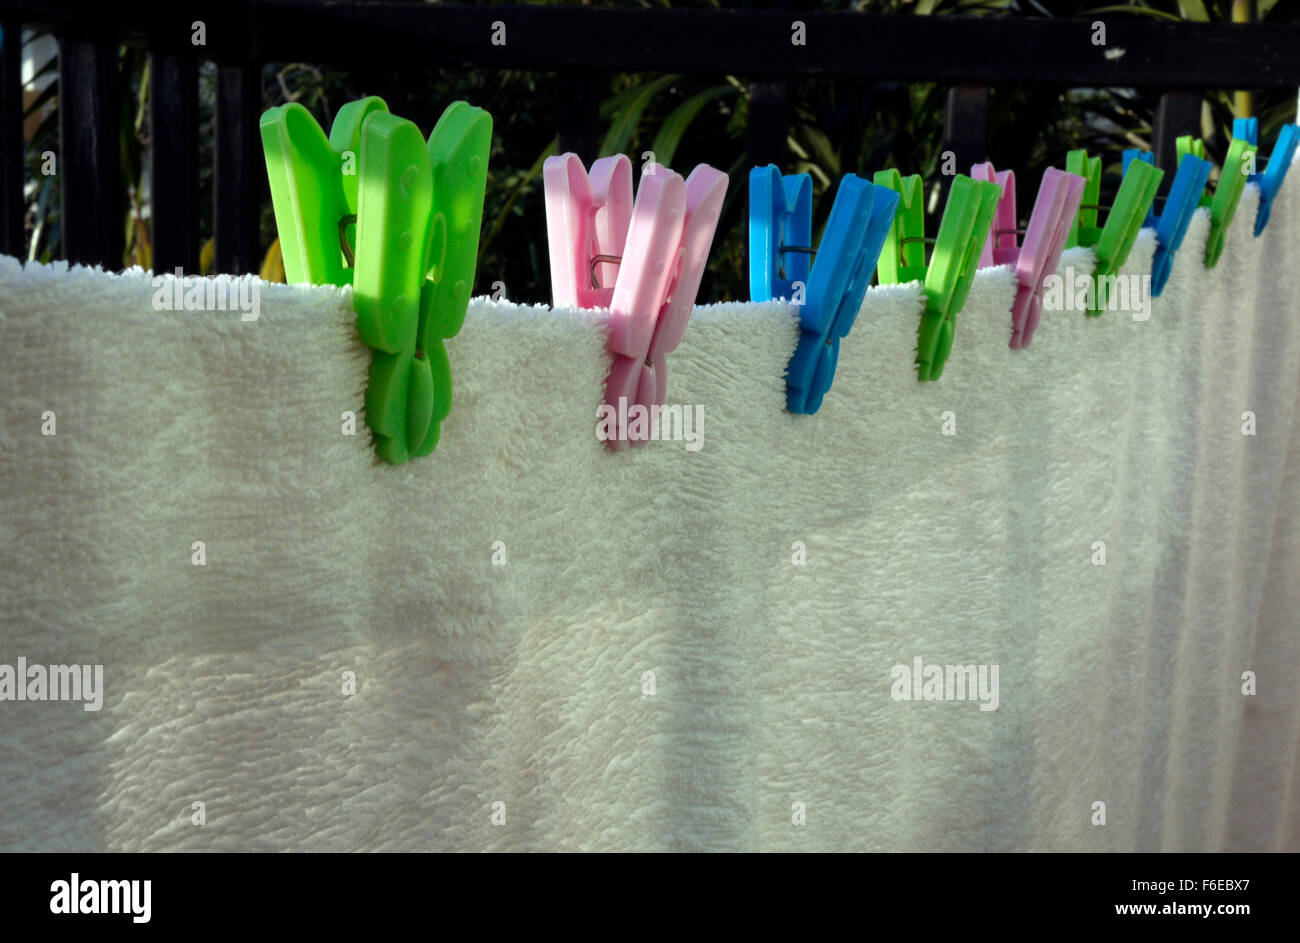 A white towel drying on a hotel balcony gripped with plastic clothes pegs Stock Photo